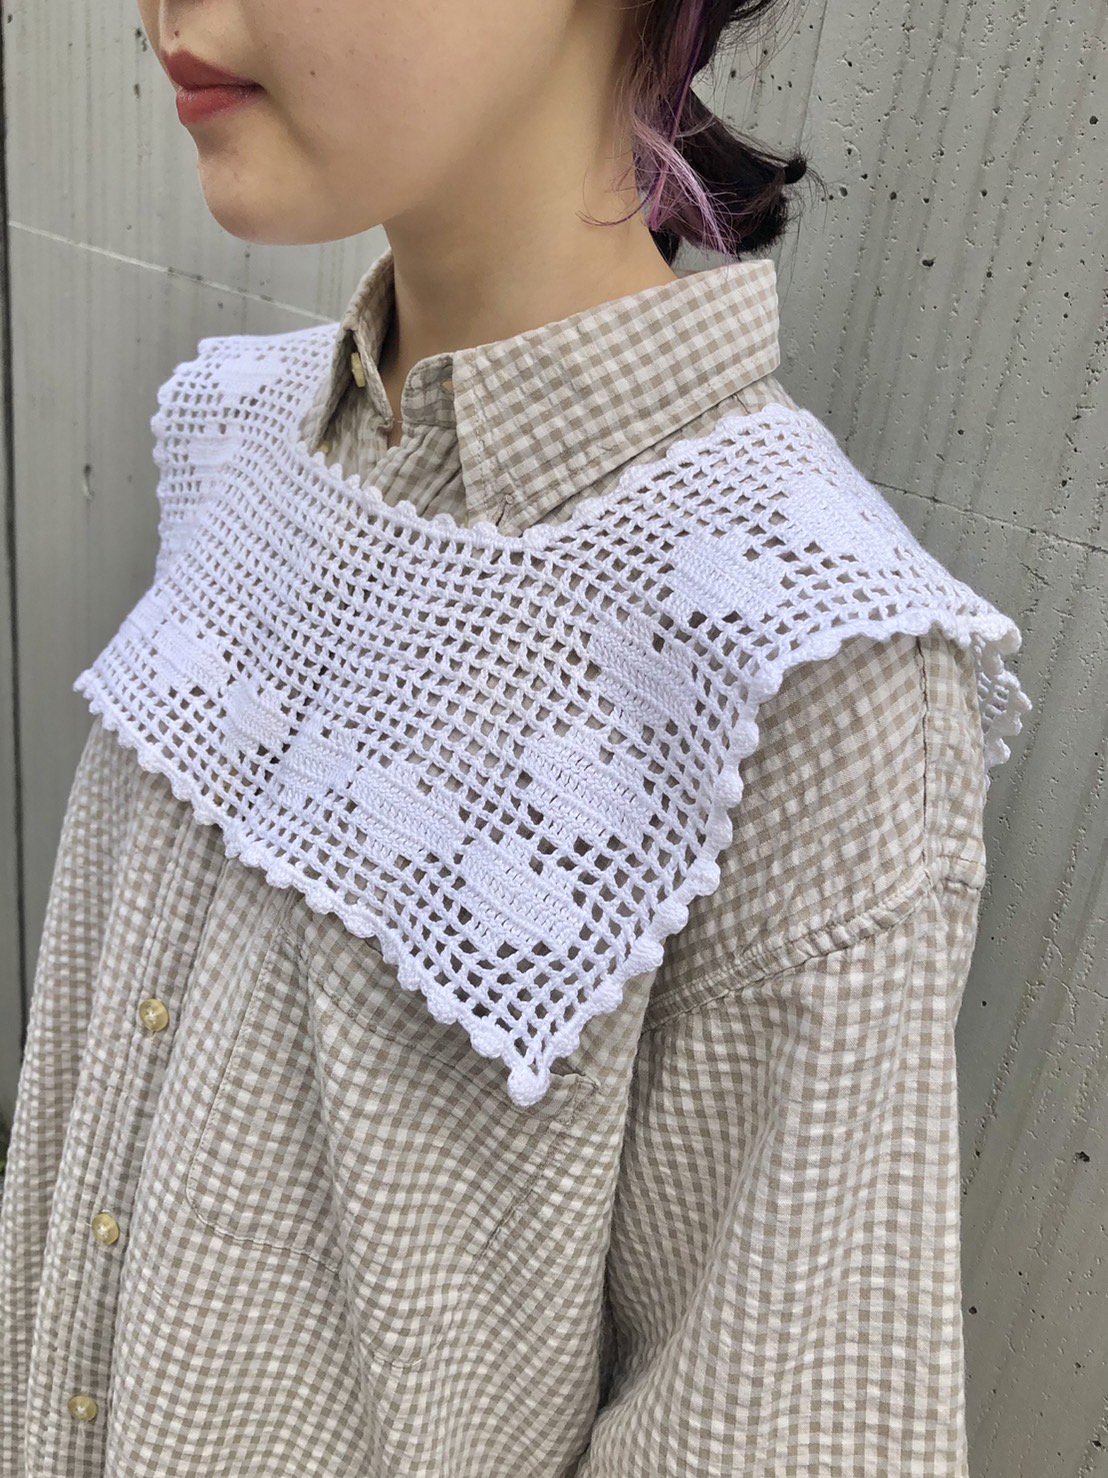 <img class='new_mark_img1' src='https://img.shop-pro.jp/img/new/icons20.gif' style='border:none;display:inline;margin:0px;padding:0px;width:auto;' />《SALE》heart line crochet collar